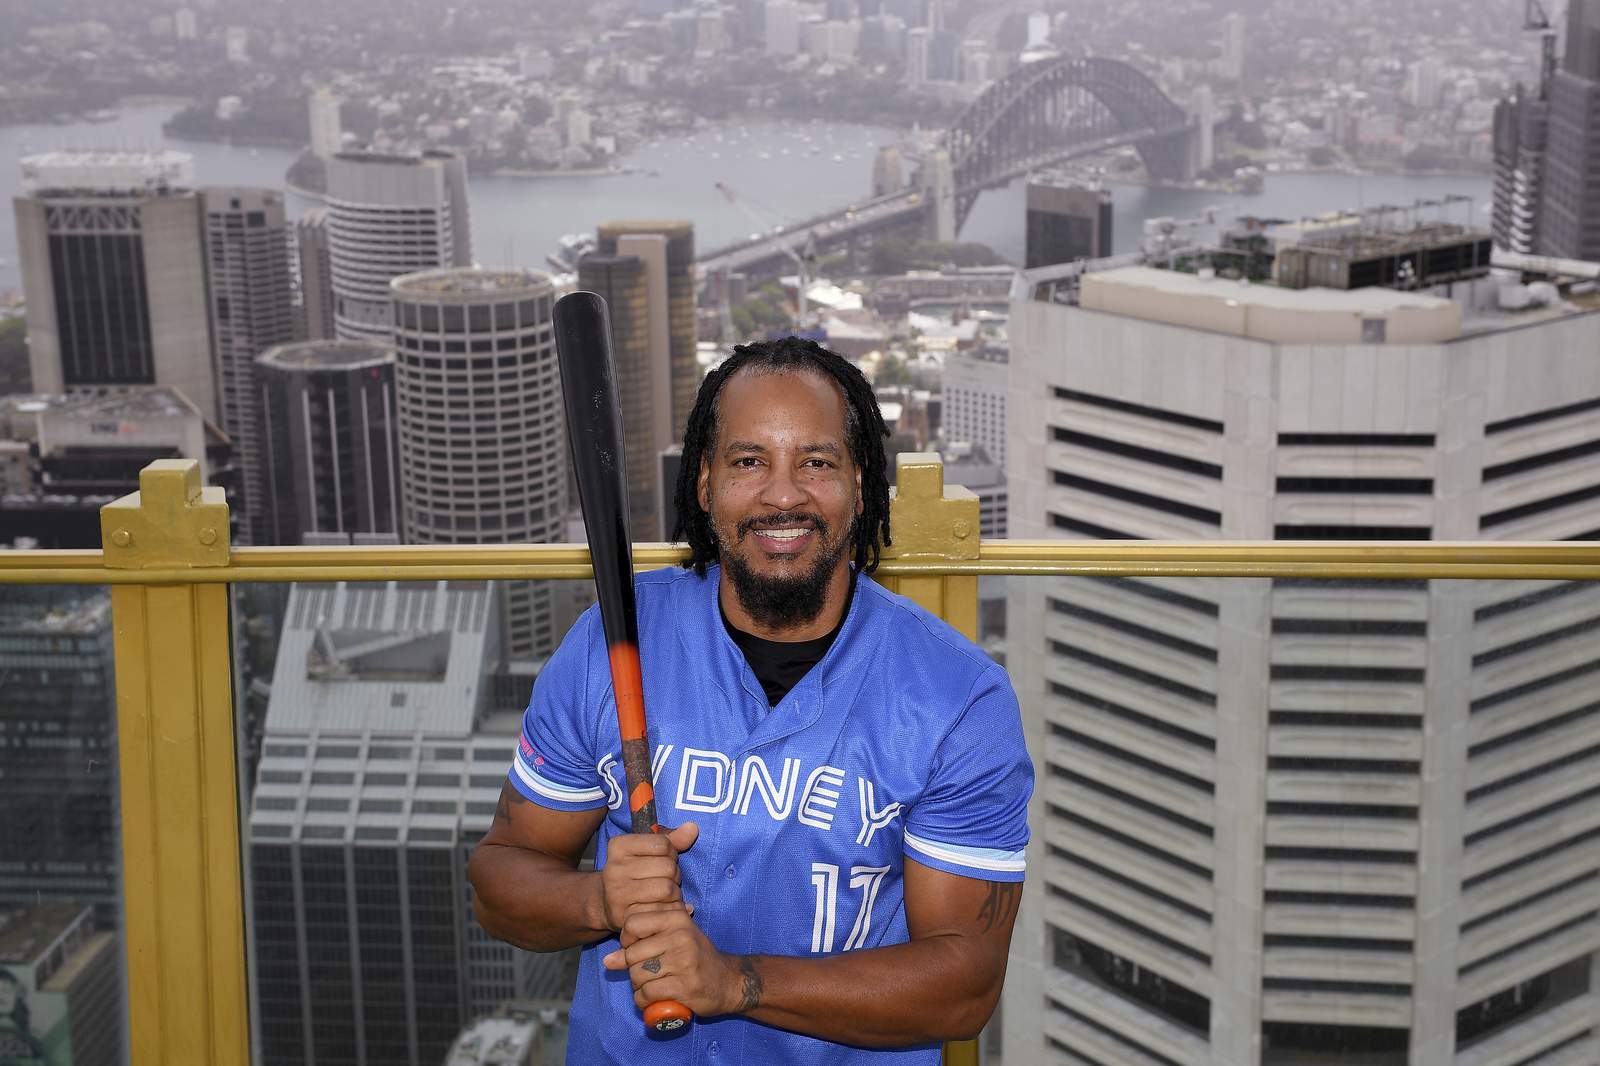 48-year-old Manny Ramirez is back in baseball Down Under